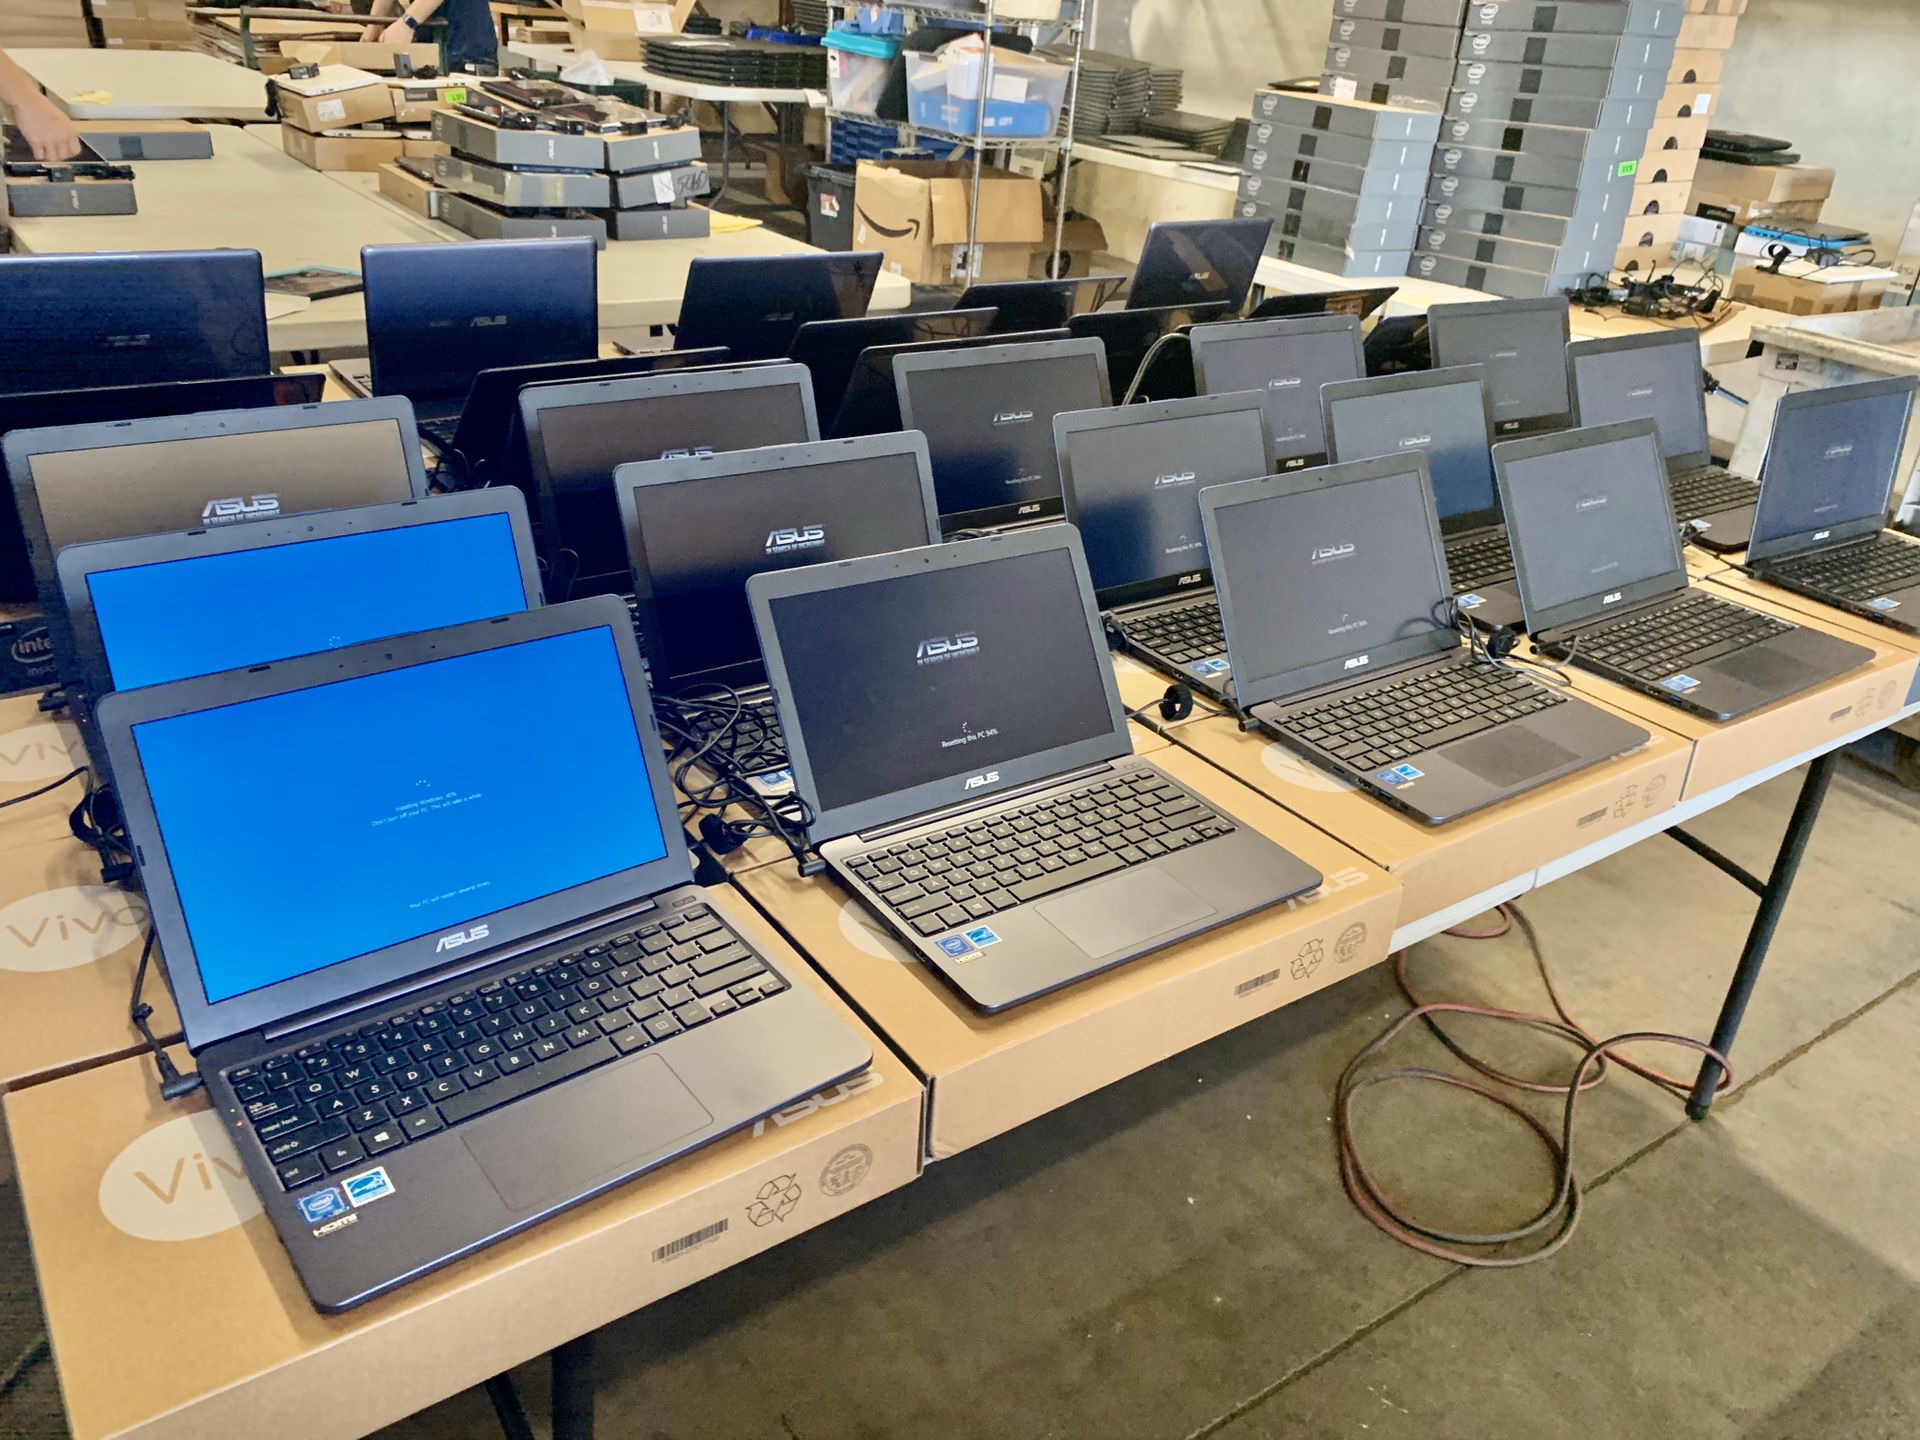 Laptops Laptops and MORE Laptops!!!!!